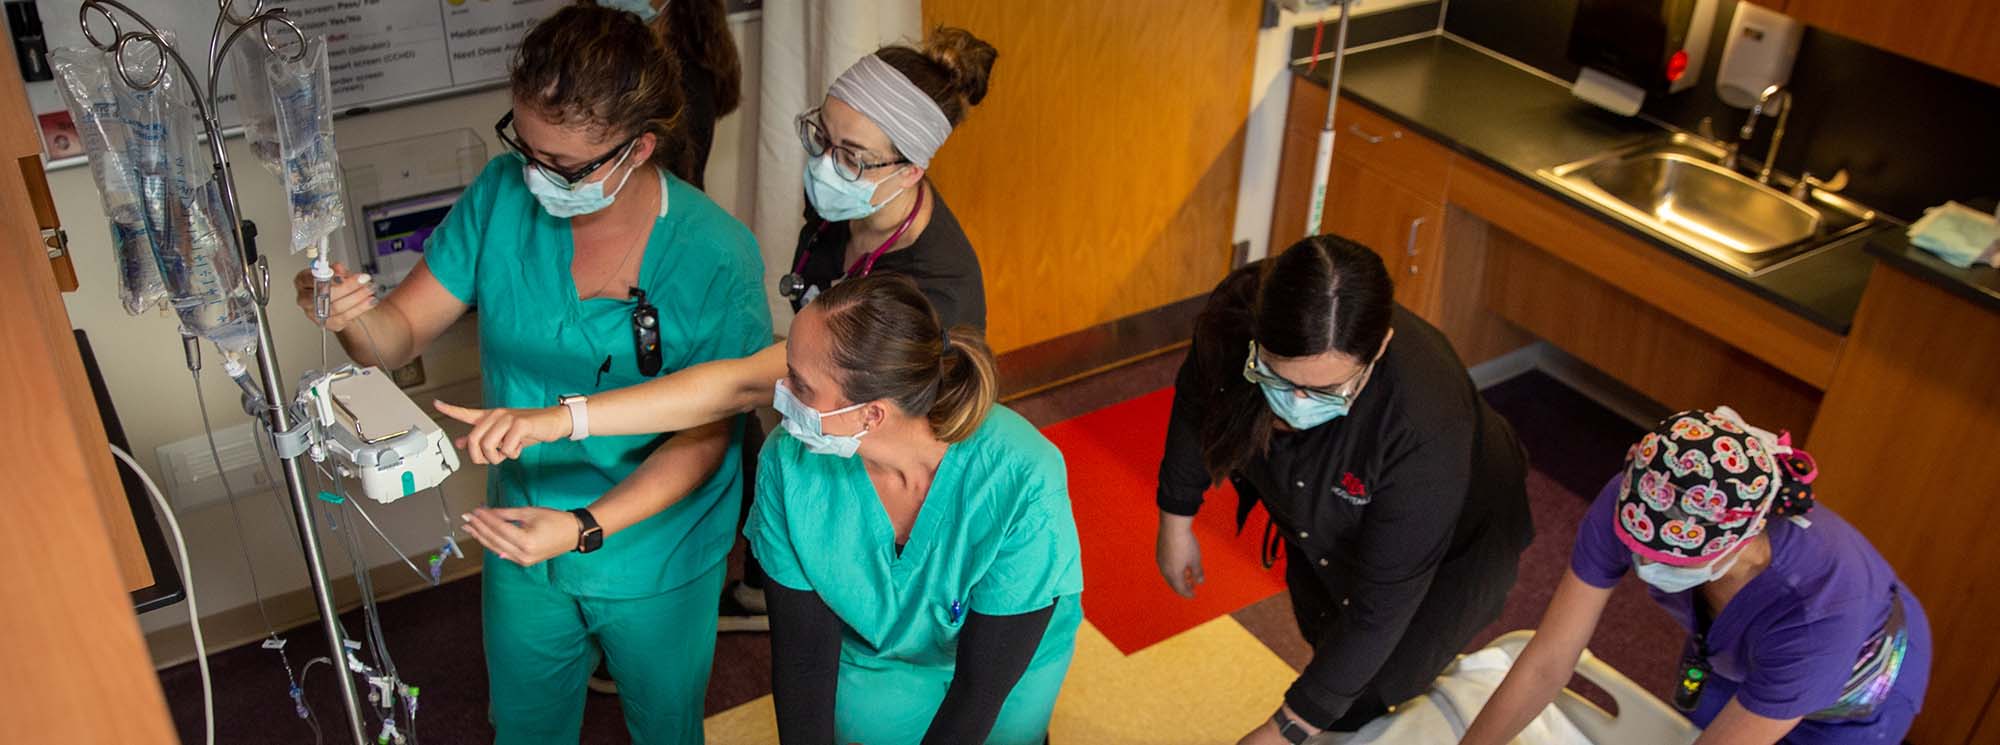 Nursing students working together on a patient